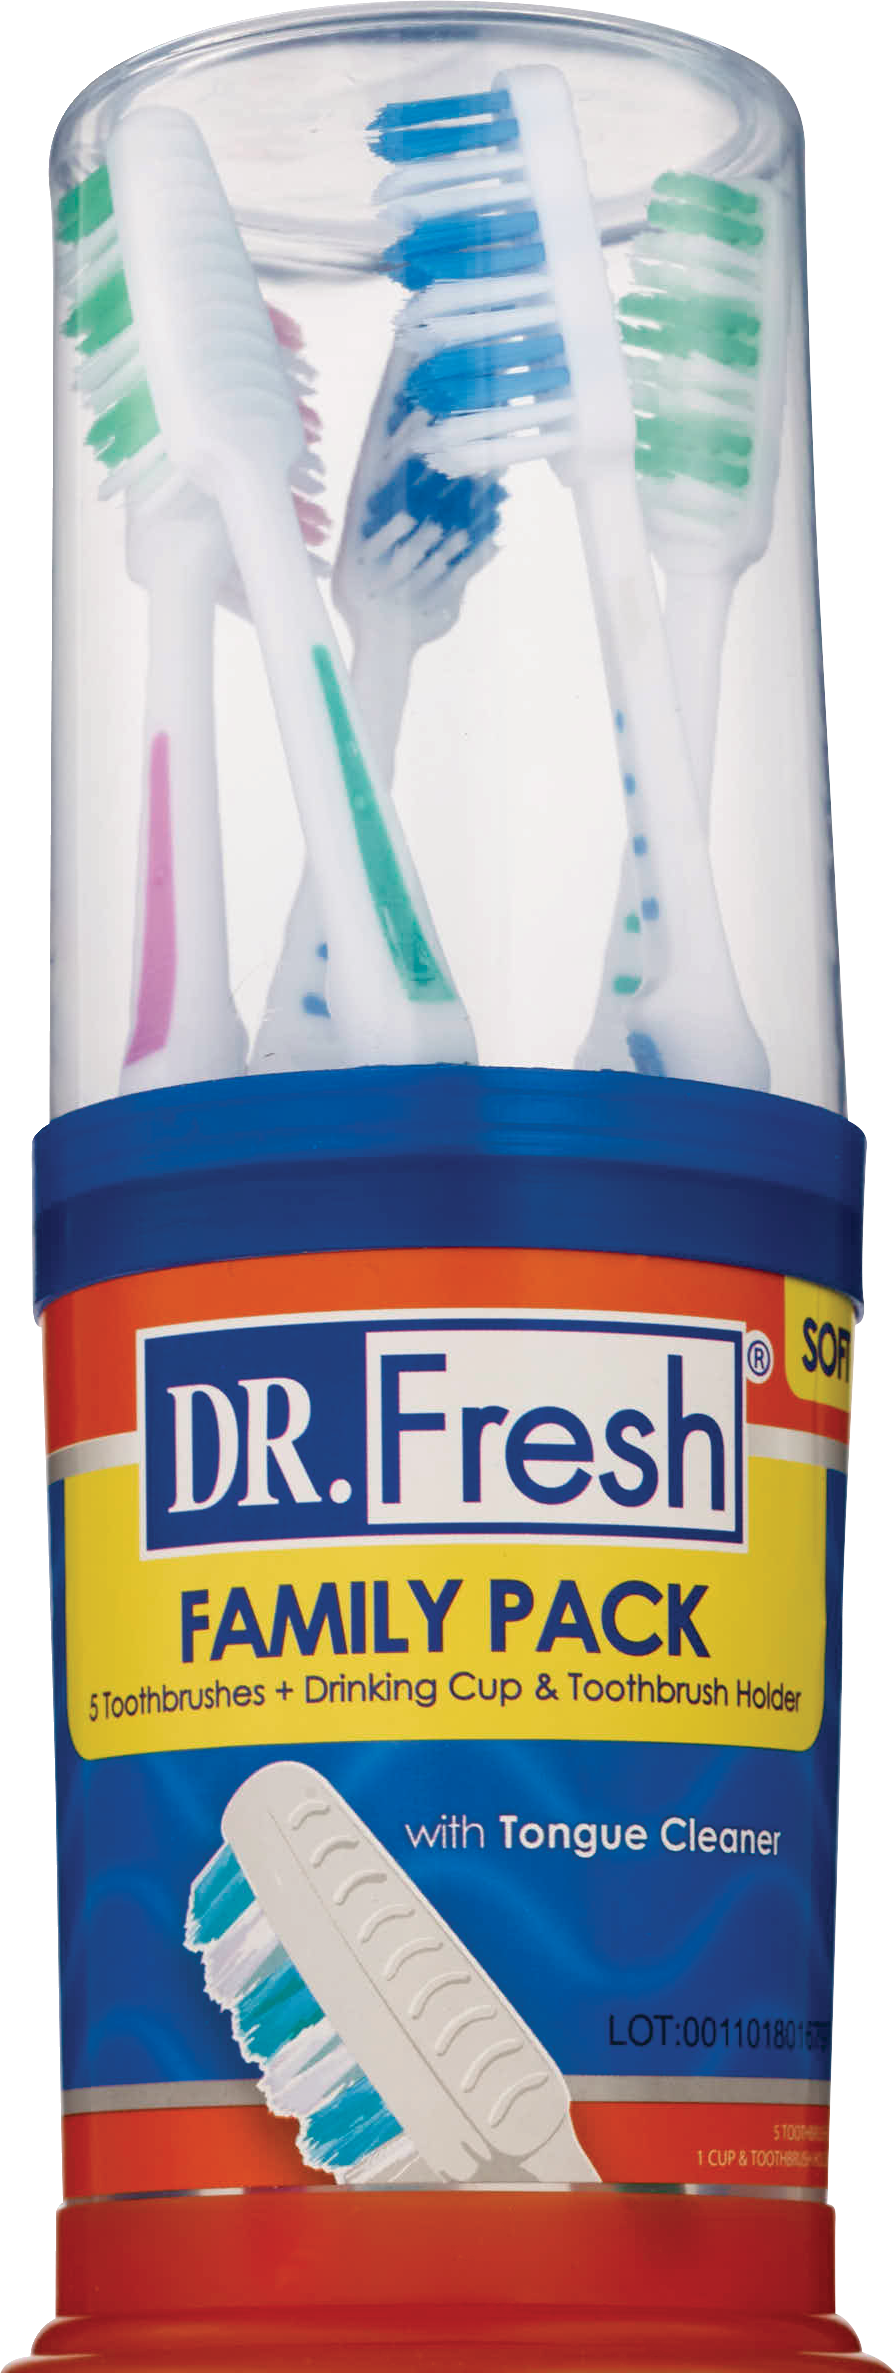 Dr. Fresh Velocity Family Pack, 5 Toothbrushes Plus Drinking Cup & Toothbrush Holder